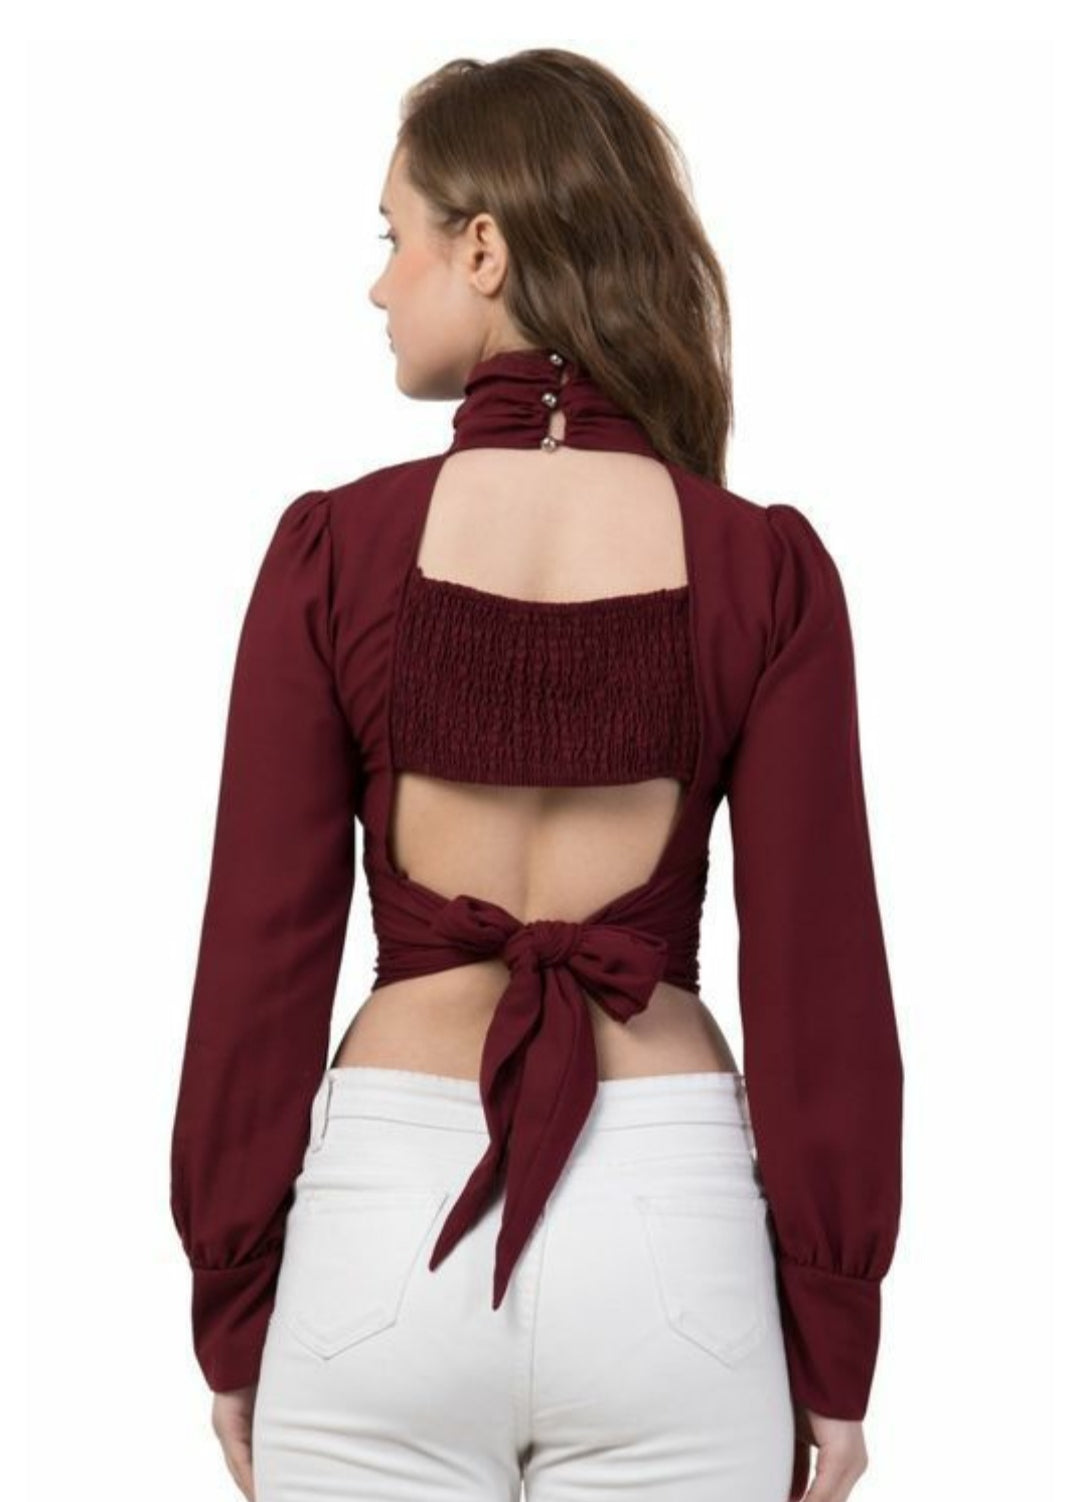 Stylish Gabriel Turtle Neck Full-Sleeves Sexy Crop Top.